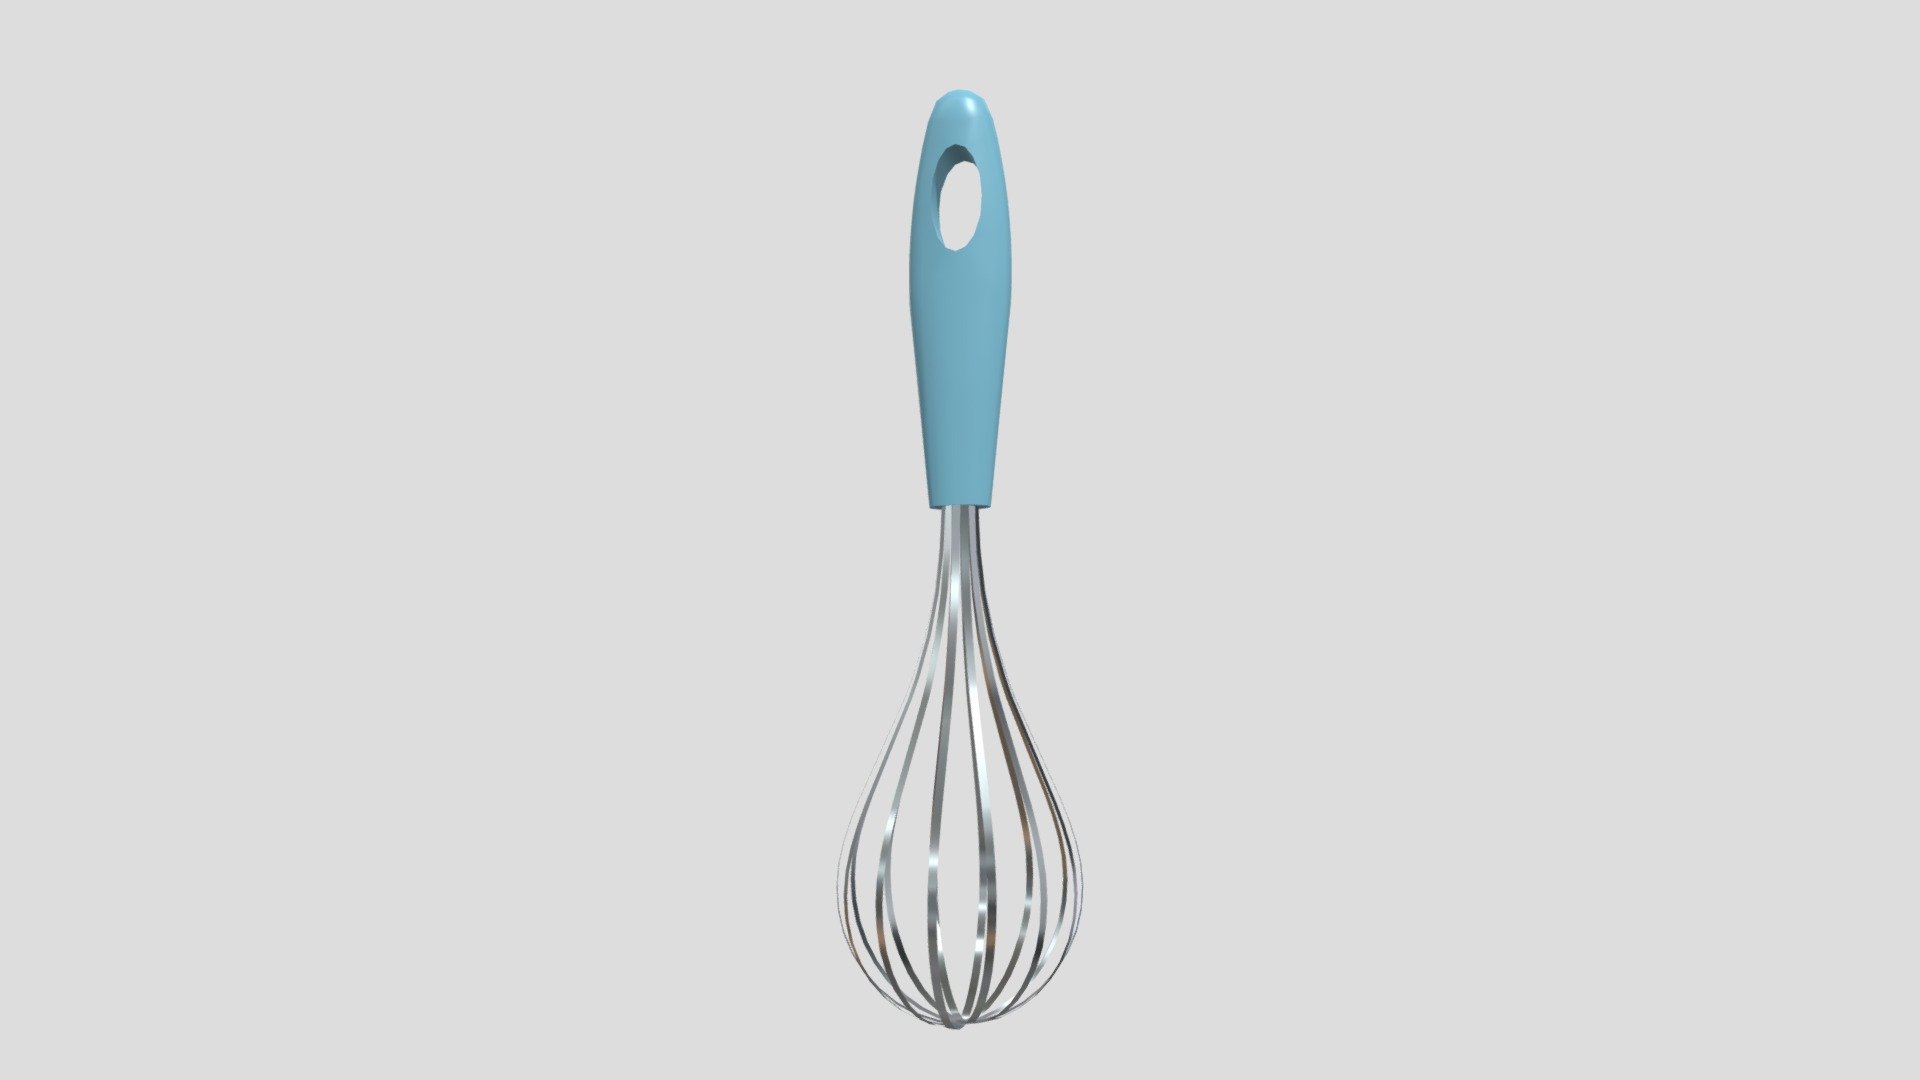 You can download this 3D model at https://o-tolab.com/serv/lowpolyya/a/202112/35/.

泡立て器の3Dモデルです。 - Whisk △950 - 3D model by O-tolab 3d model